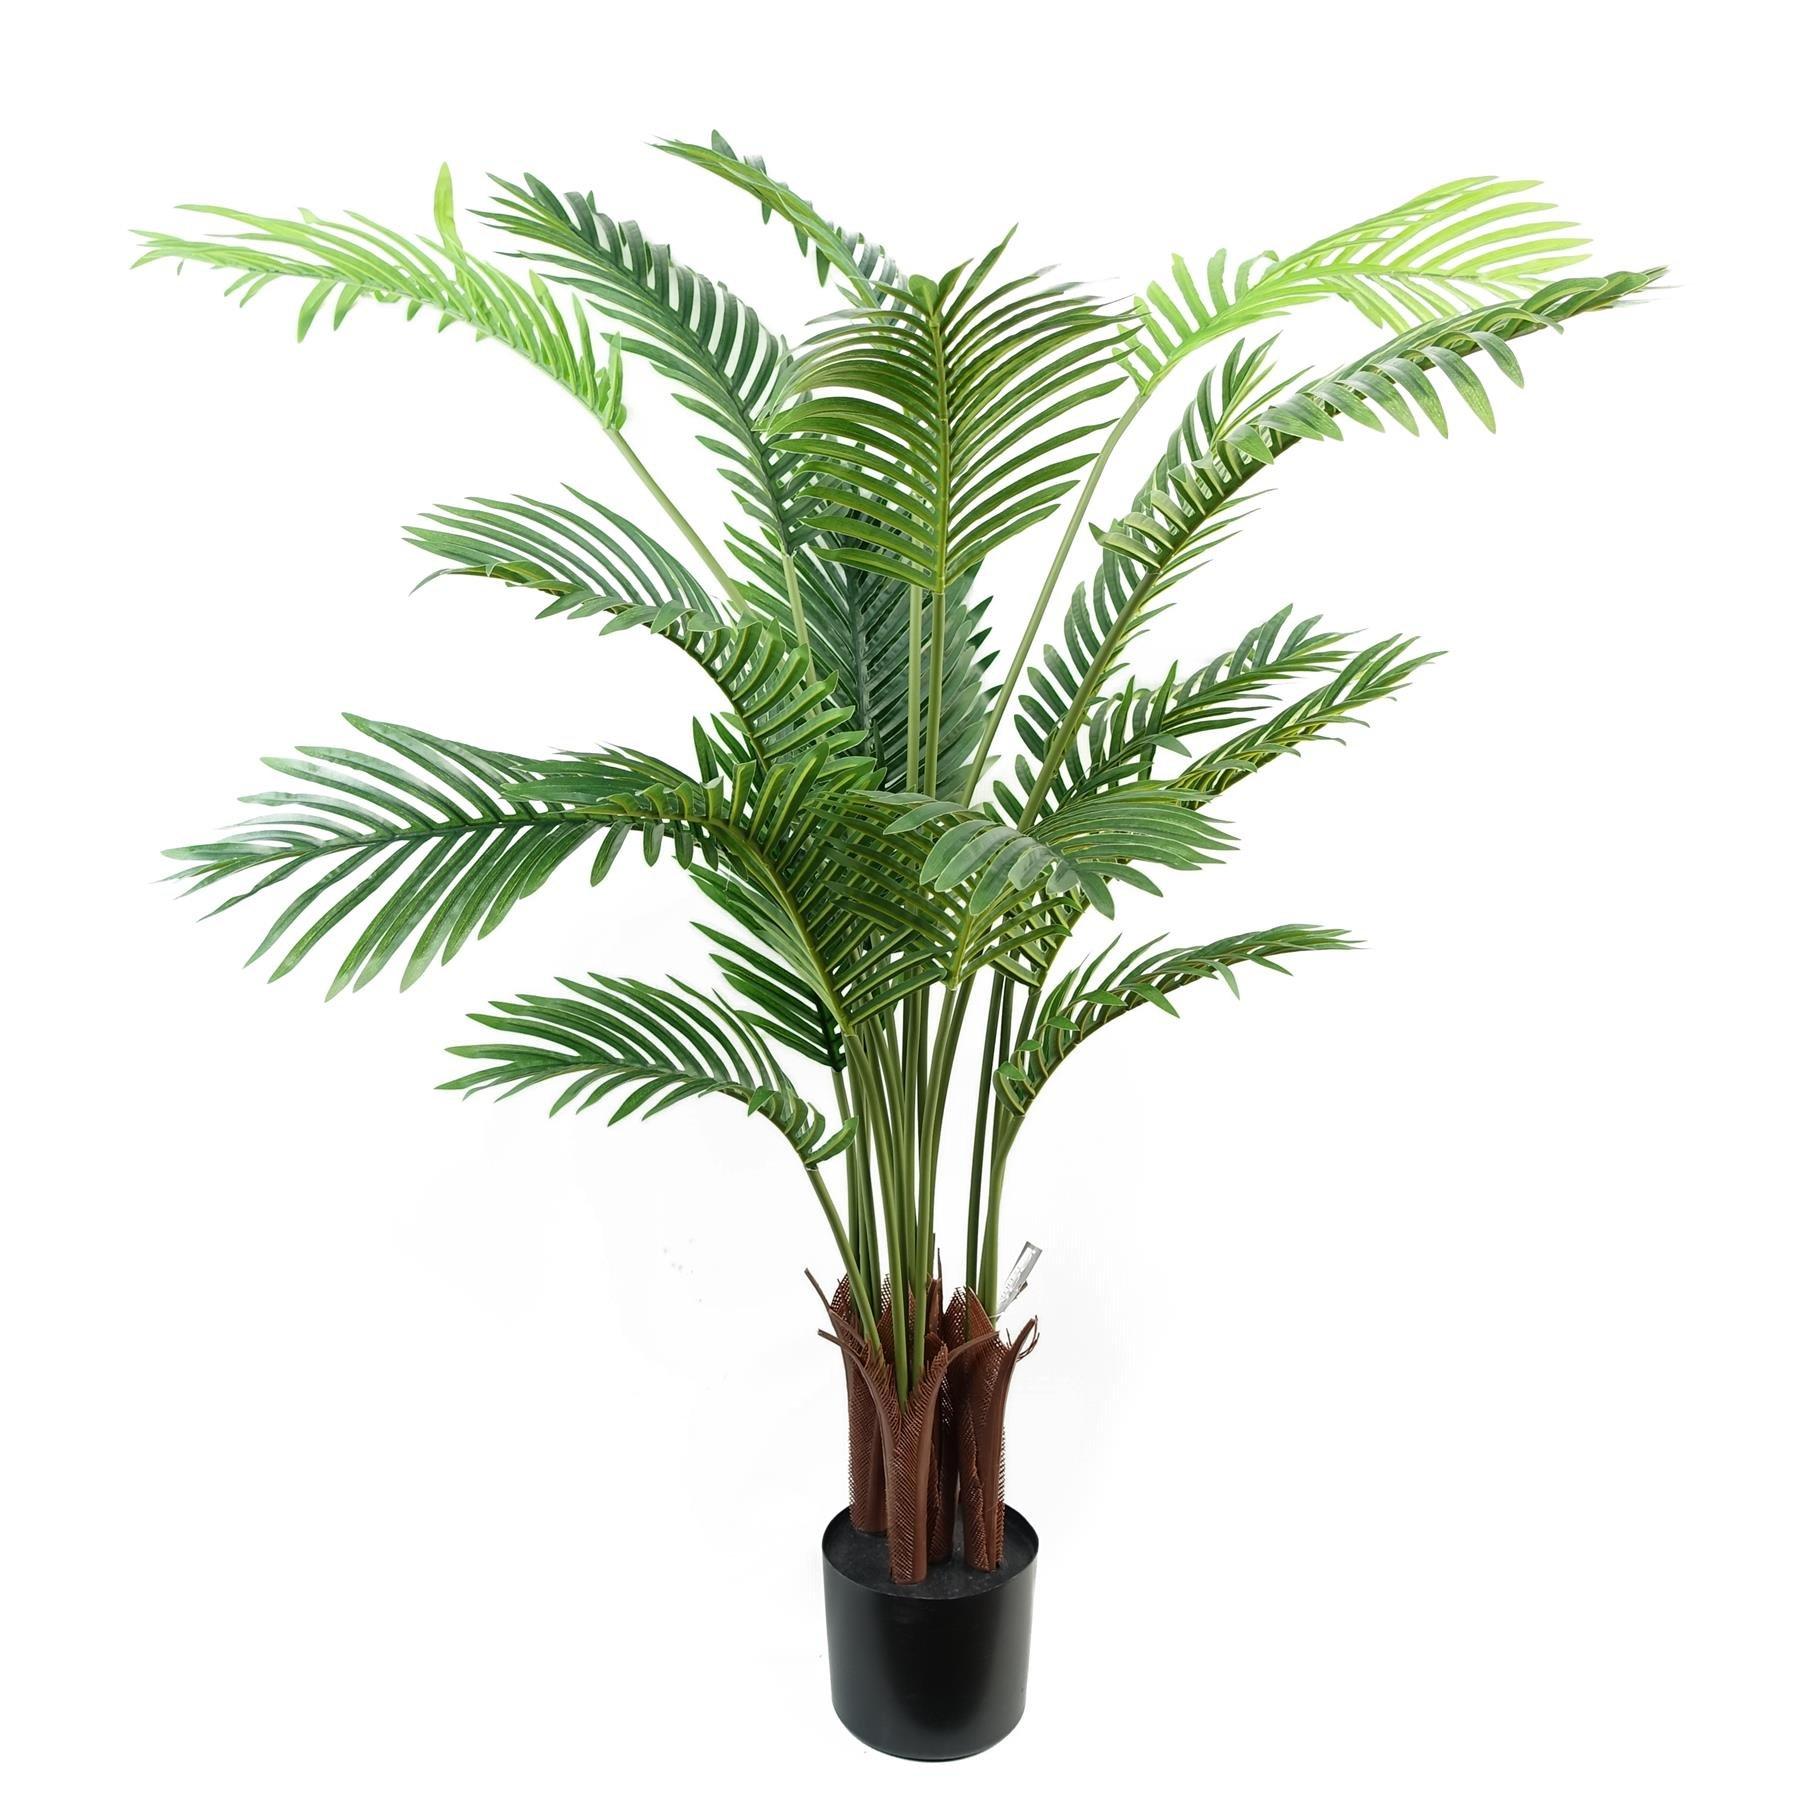 110cm Artificial Areca Palm Tree Potted in Black Pot